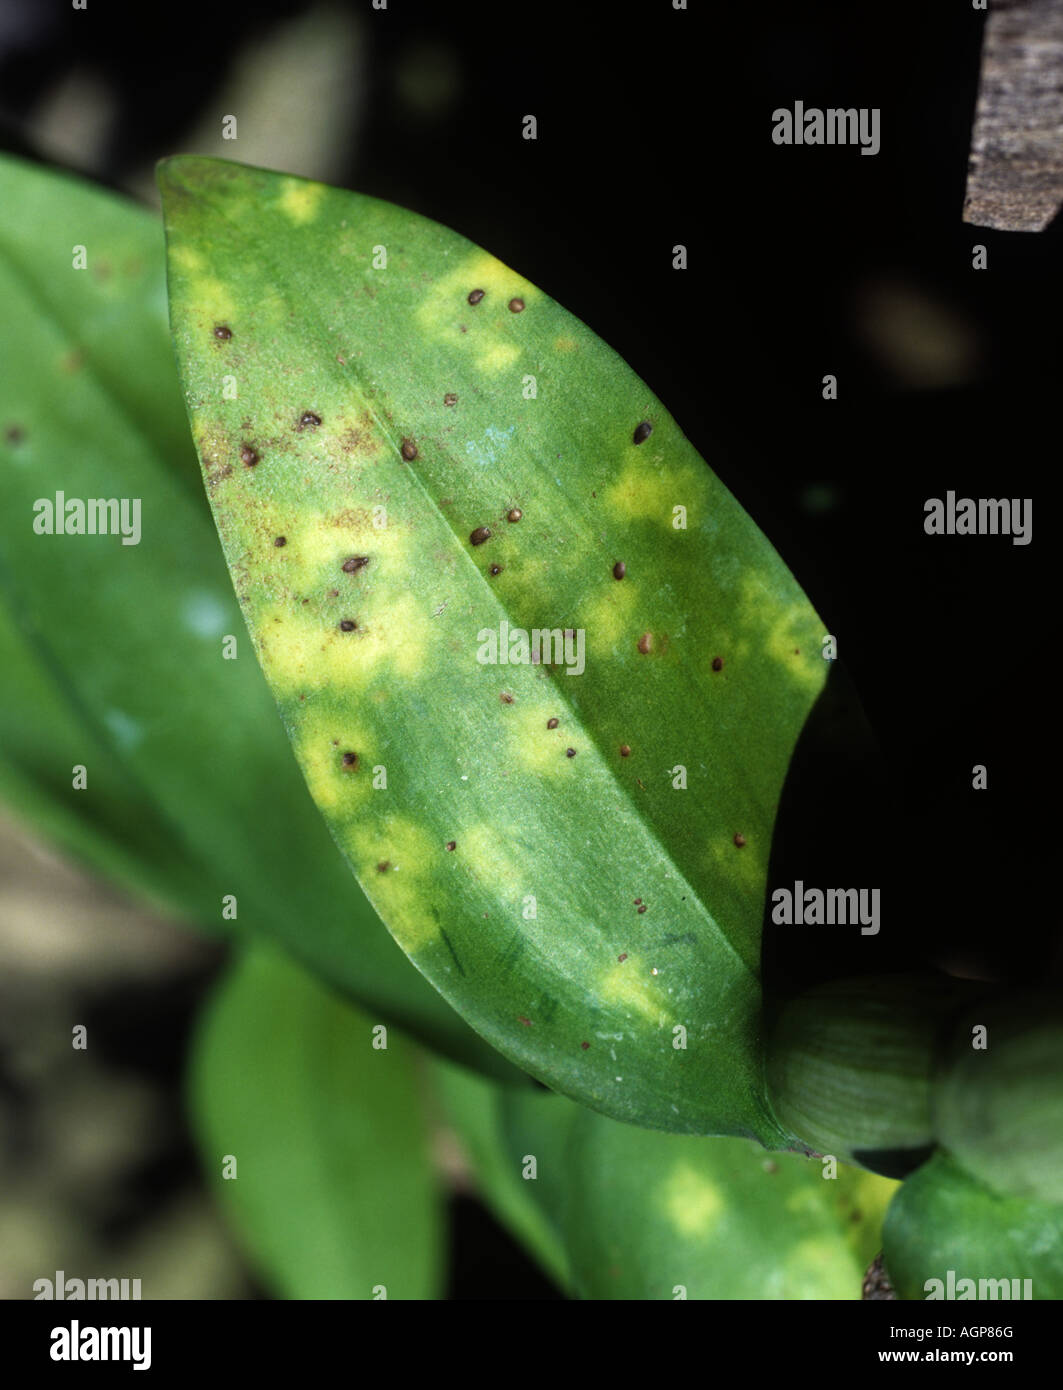 Alternaria leaf spot Alternaria sp on cultivated orchid leaf Thailand Stock Photo